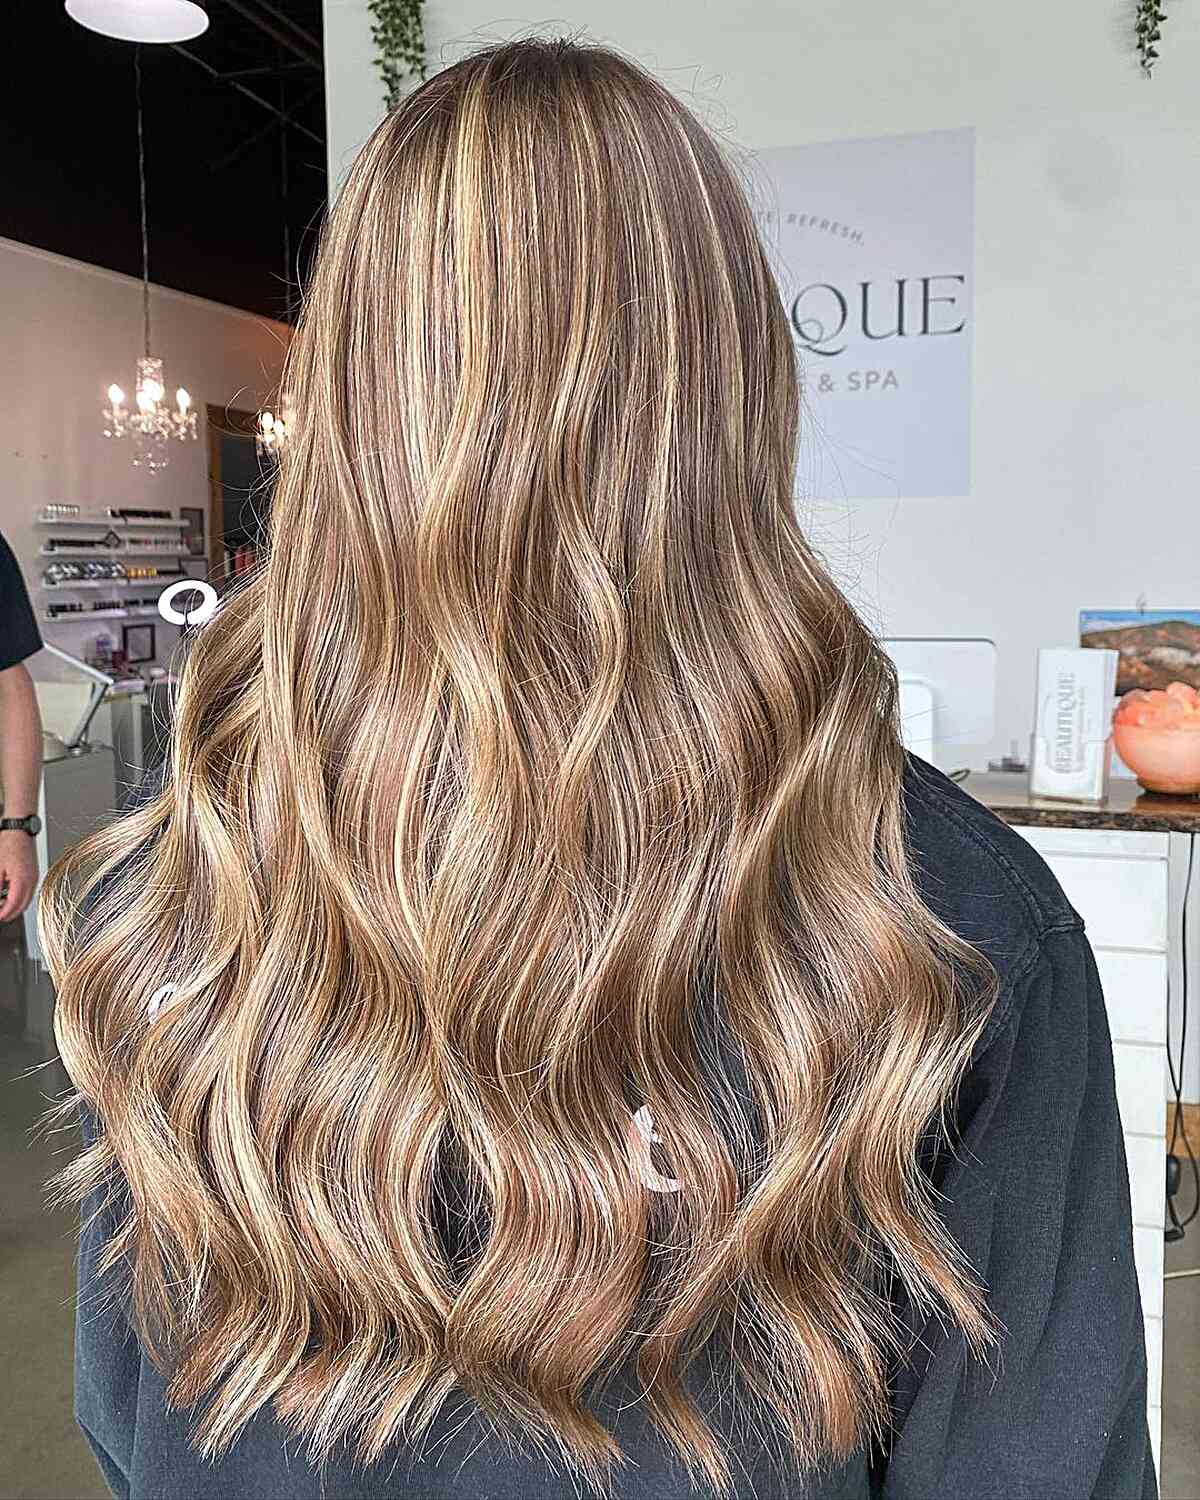 Long-Length Dimensional Blonde Balayage with Soft Waves